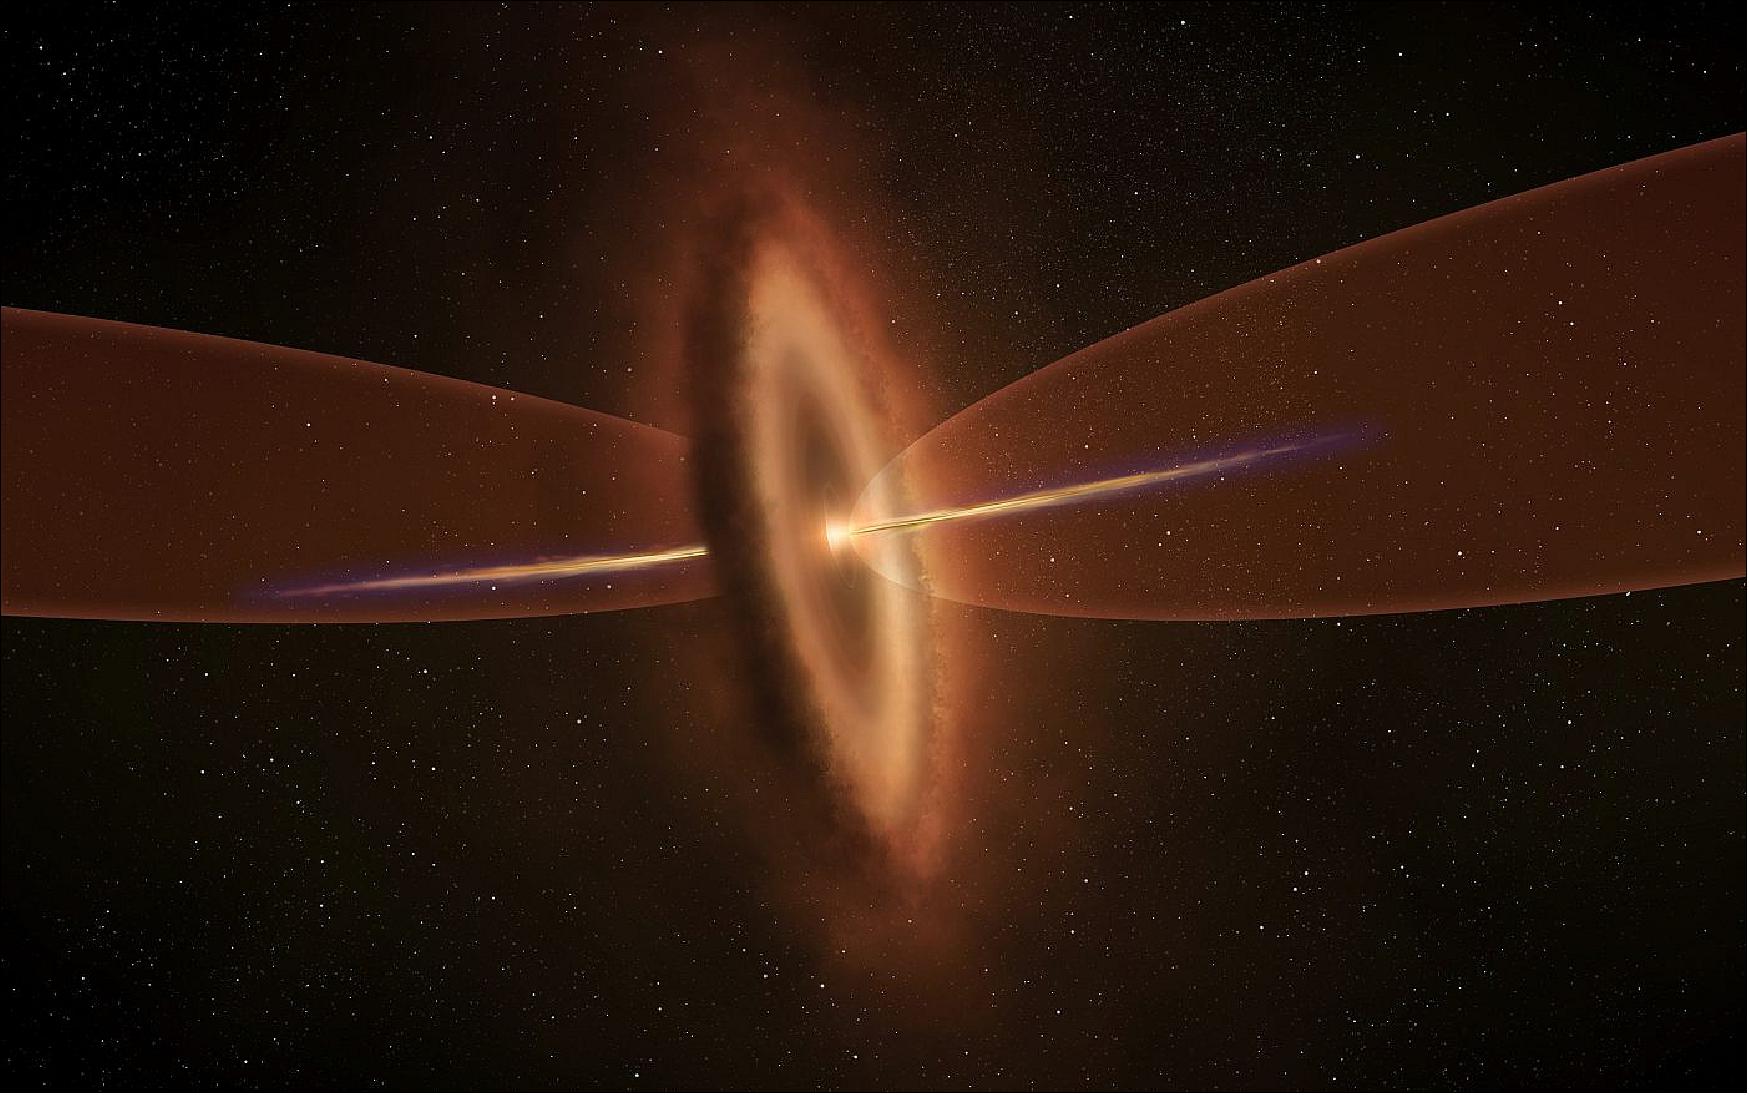 Figure 101: Artist’s impression of the baby star MMS5/OMC-3. ALMA observations identified two gas streams from the protostar, a collimated fast jet and a wide-angle slow outflow, and found that the axes of the two gas flows are misaligned (image credit: NAOJ)